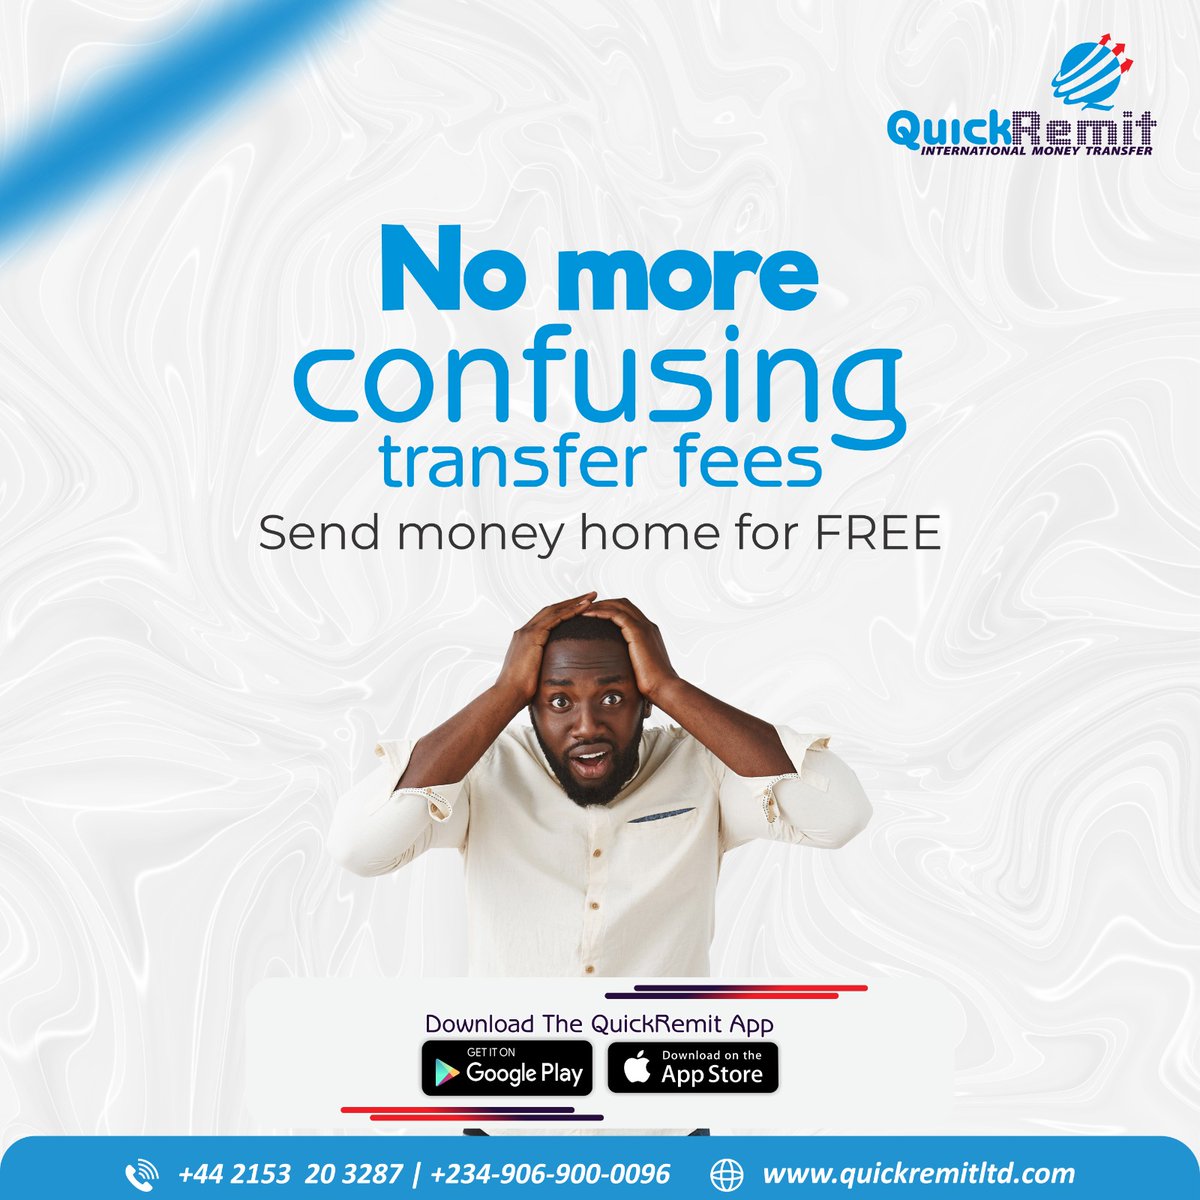 Why settle for expensive money transfers when you can send money home quickly and securely?

…all for FREE

Come to the QuickRemit side of Life

Download the QuickRemit app now
Available on Google and IOS stores

#QuickRemit #seamlesstransfers #UKtoNigeria #Remitwithease